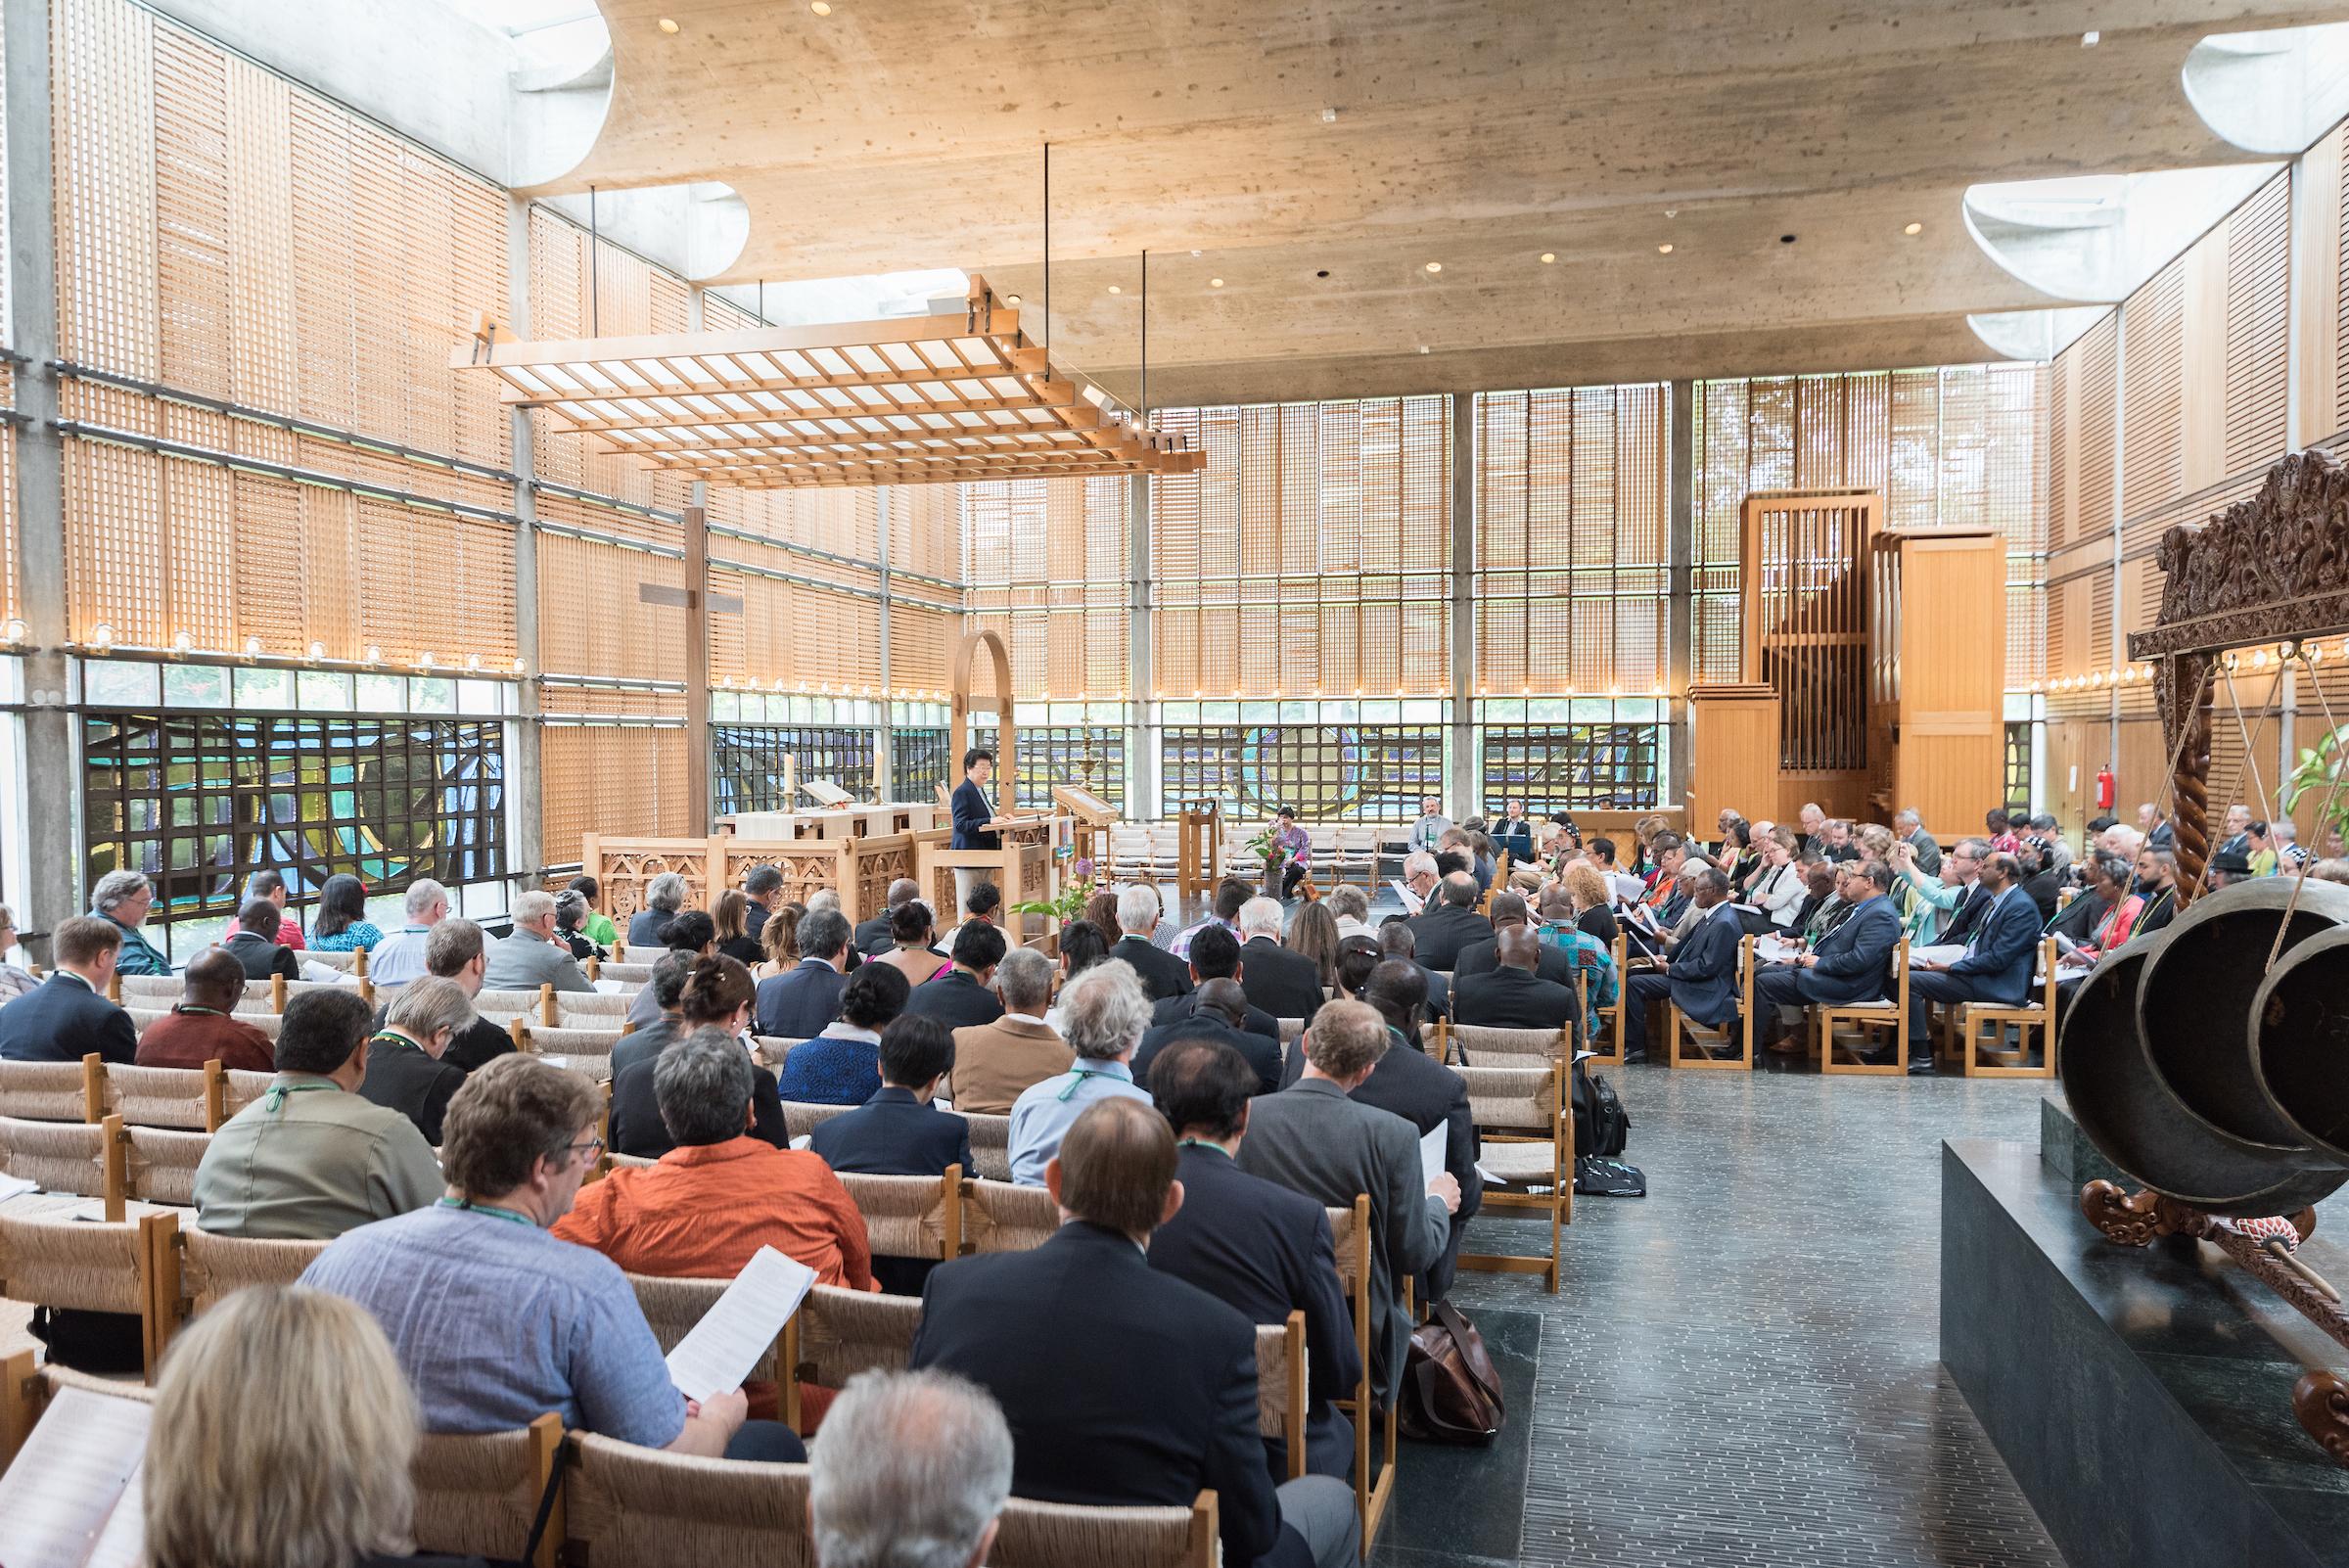 Opening worship of the Central Committee meeting in the chapel of the Ecumenical Centre. Photo: Albin Hillert/WCC.